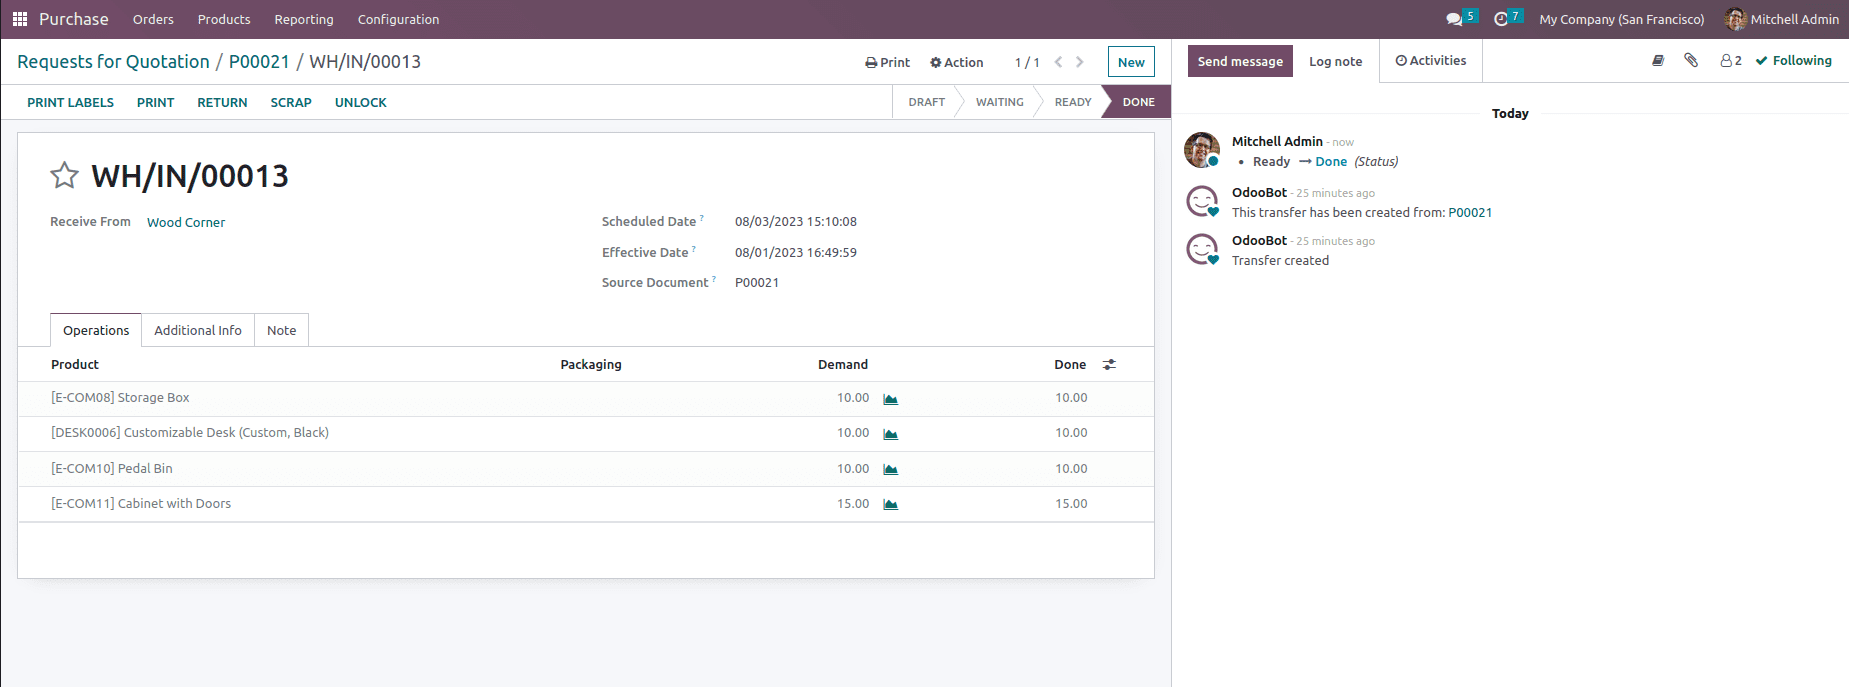 How to Set Receipt Remainder in Odoo 16 Purchase App-cybrosys